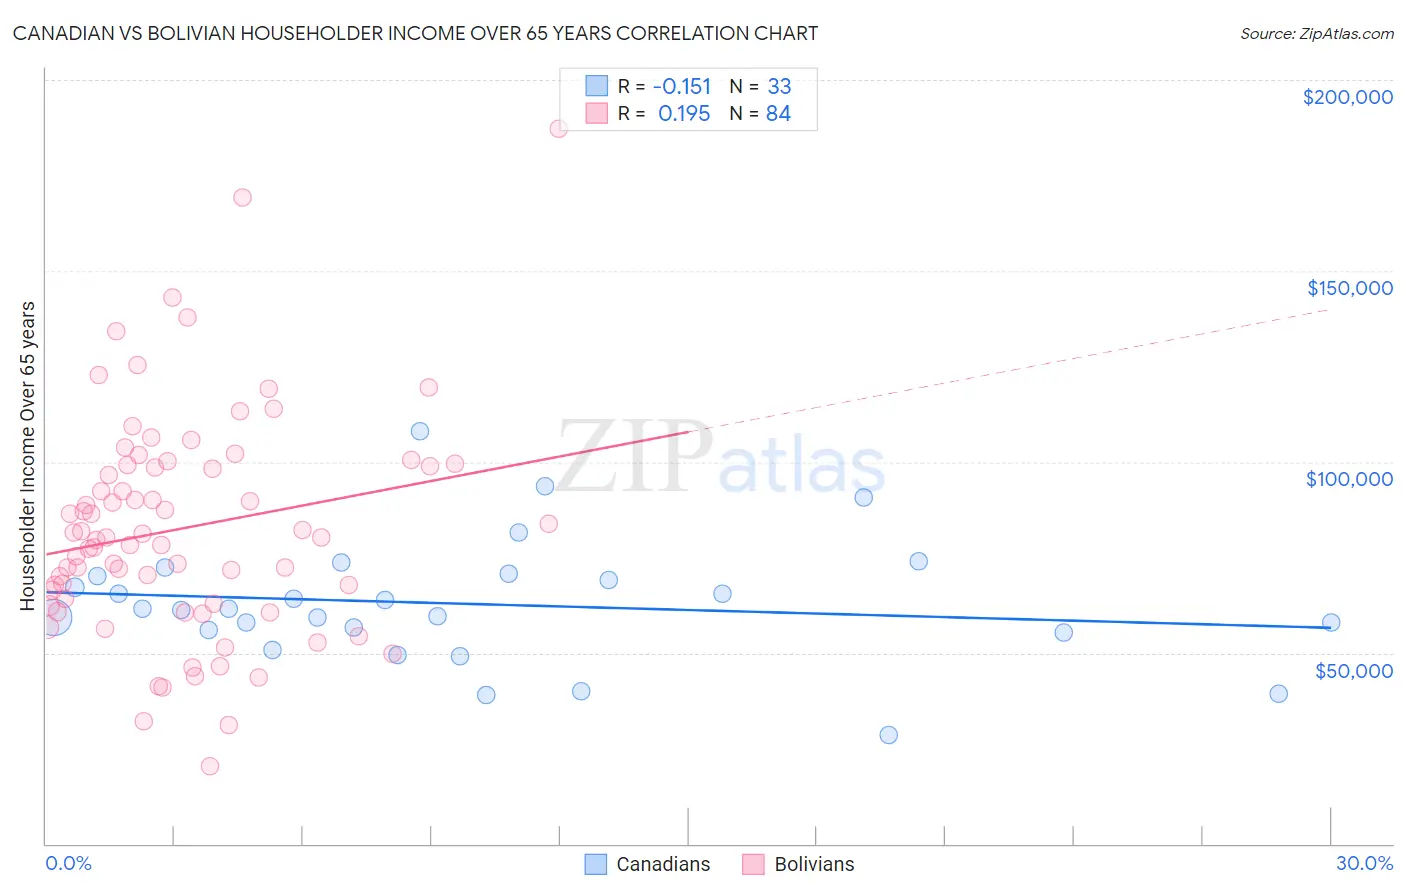 Canadian vs Bolivian Householder Income Over 65 years